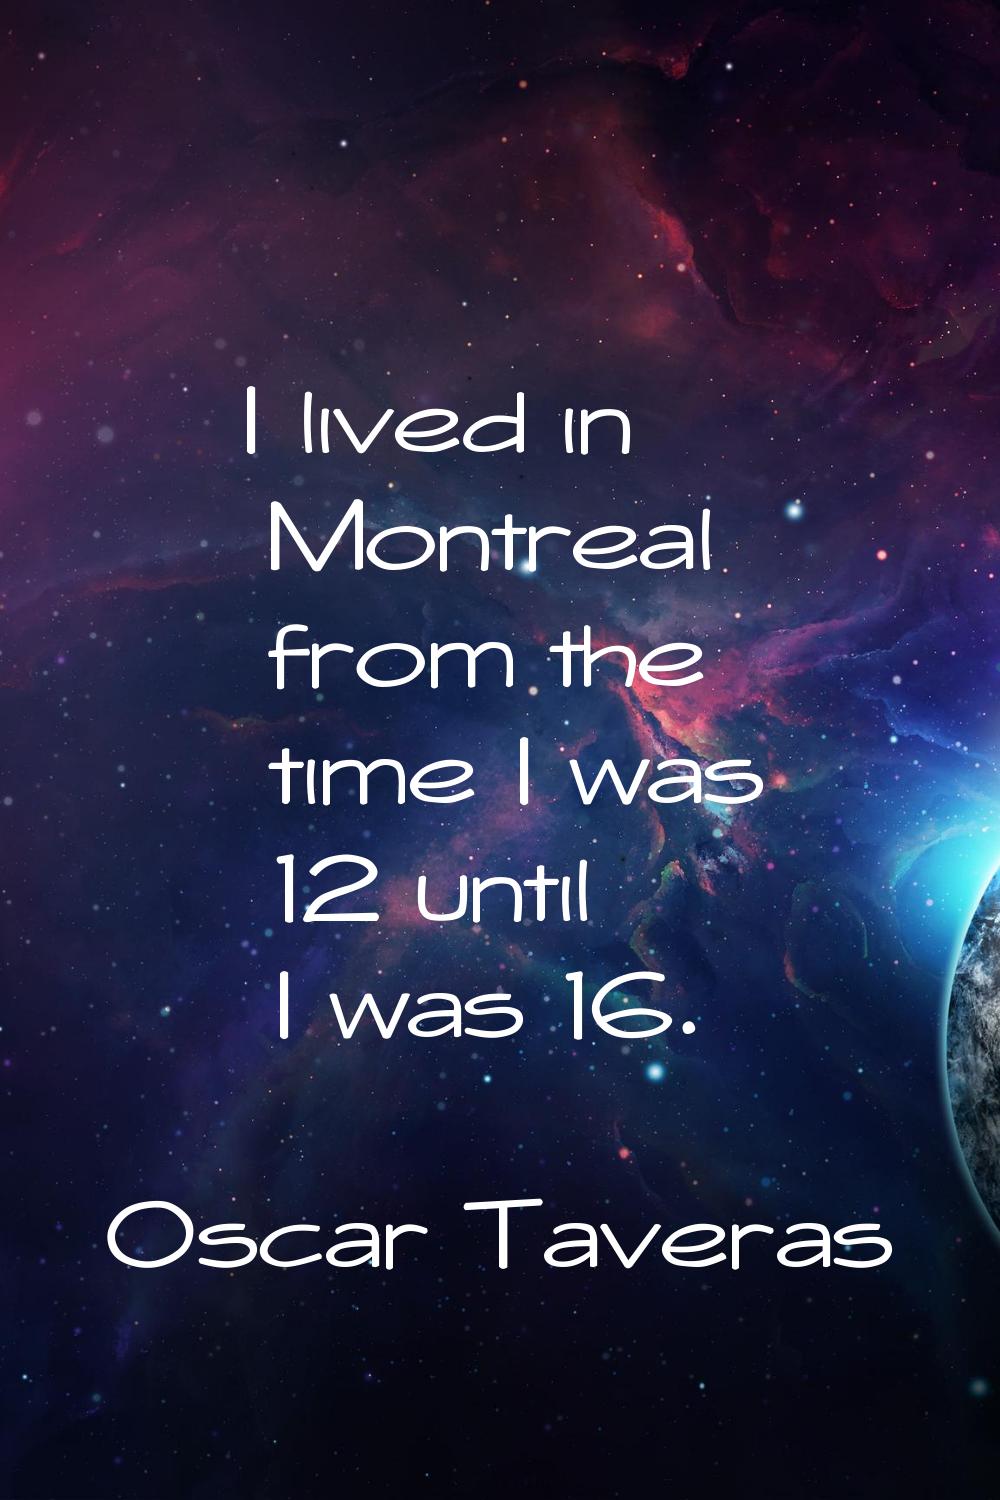 I lived in Montreal from the time I was 12 until I was 16.